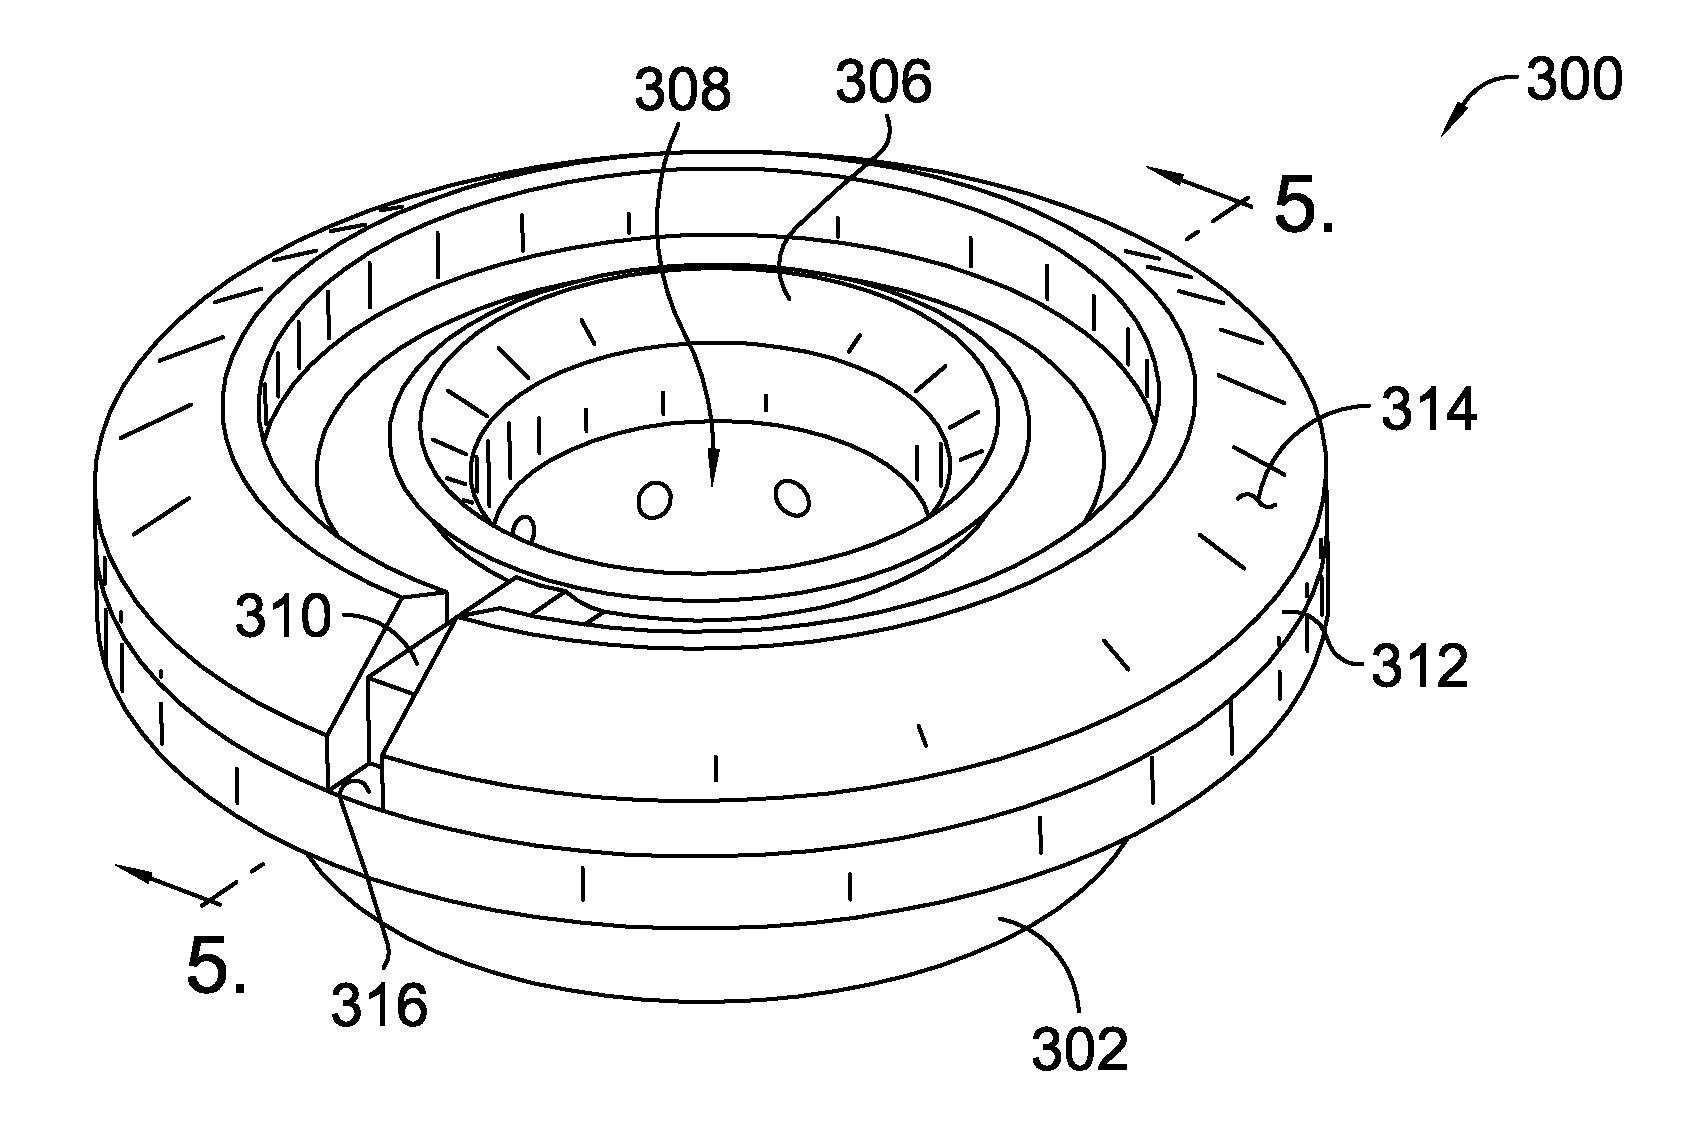 Retaining collar for a gas turbine combustion liner